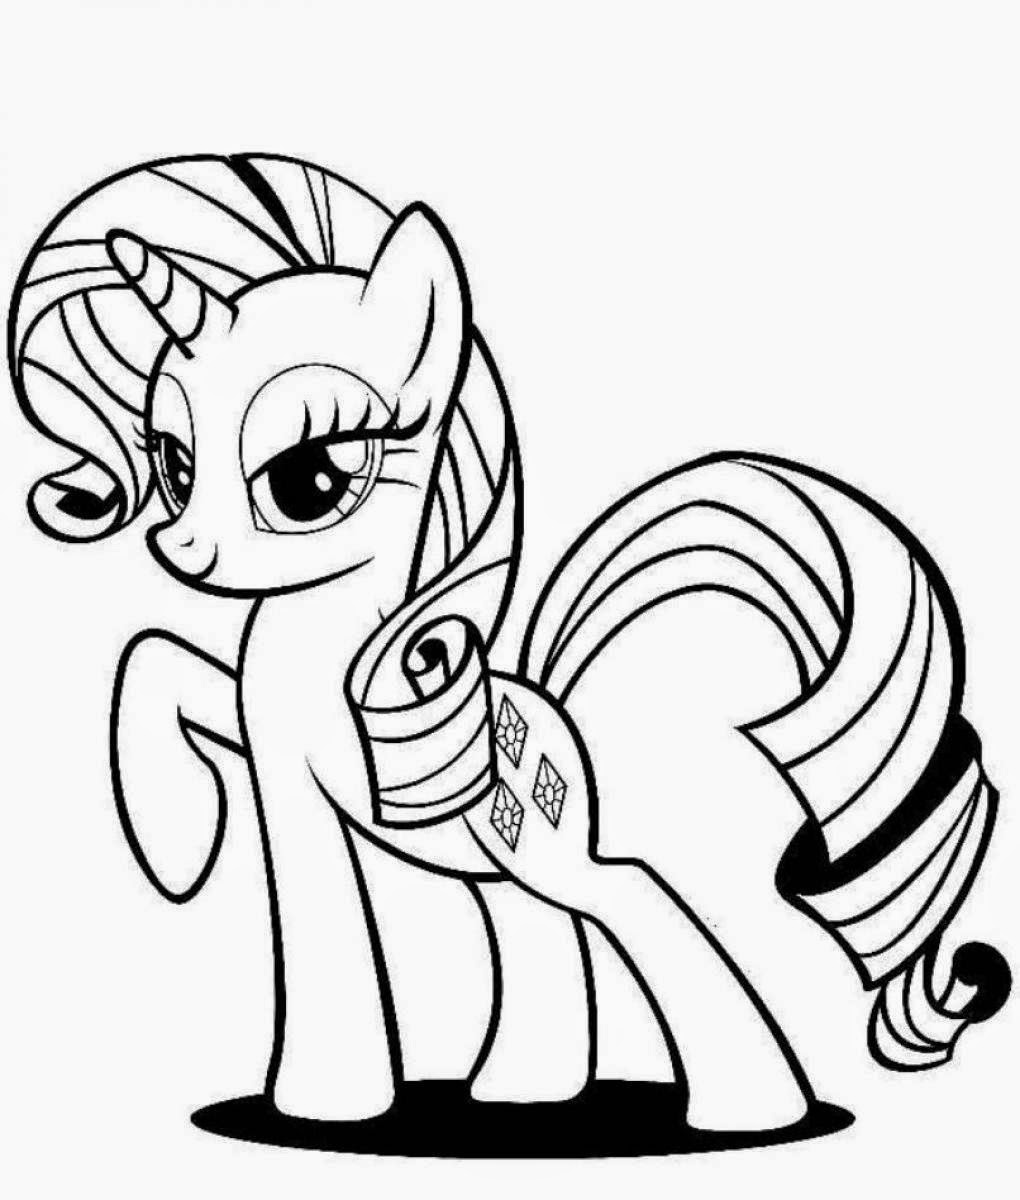 My little Pony Rarity Coloring Pages